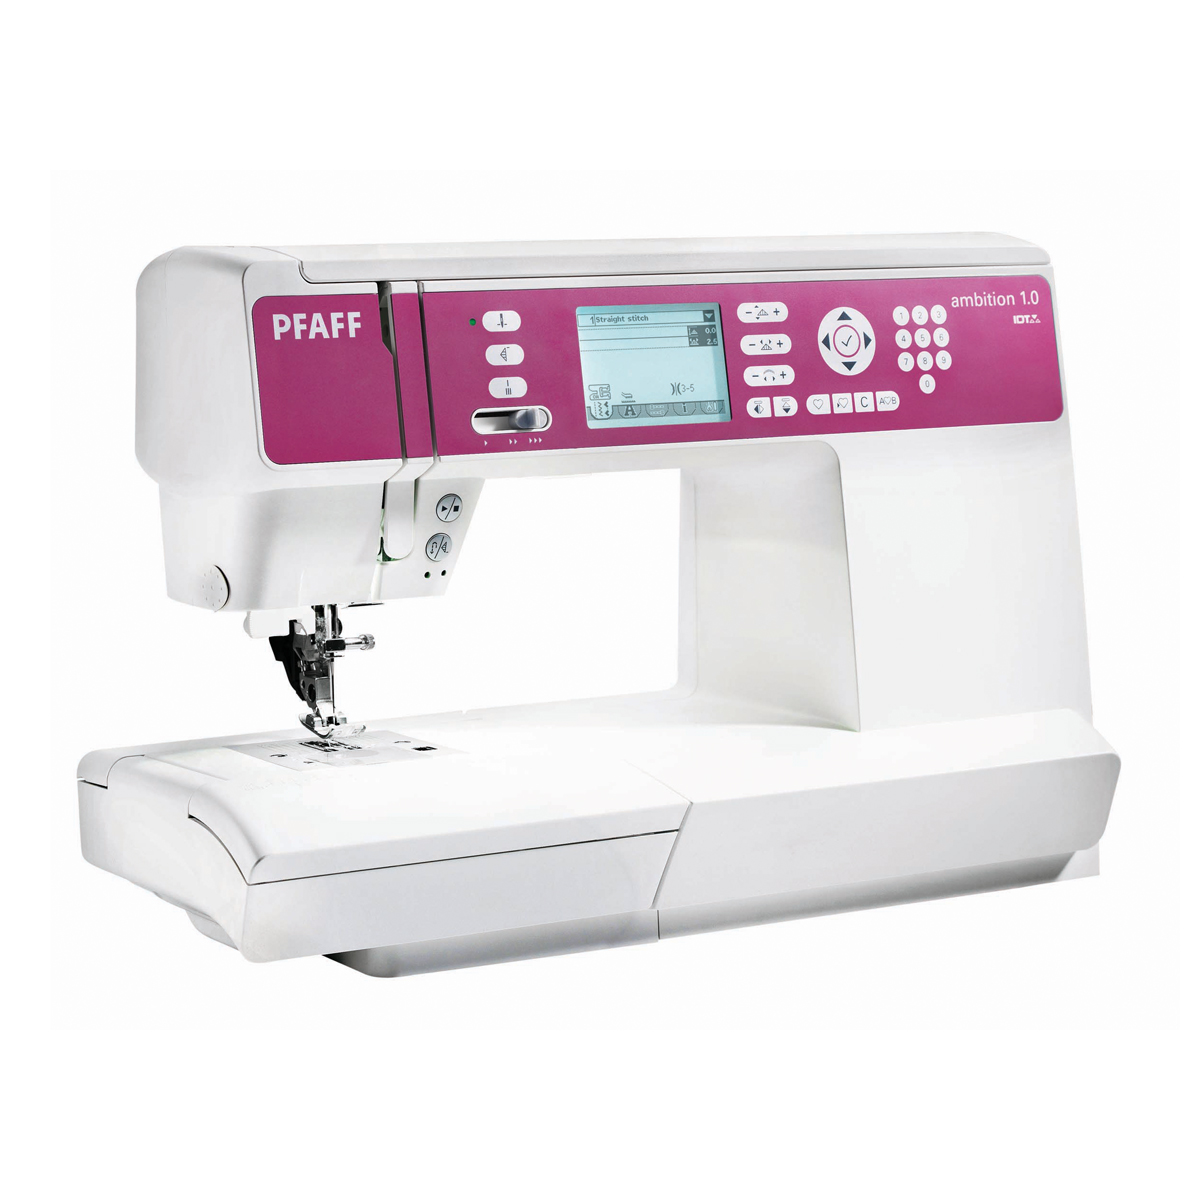 Pfaff Ambition 1.0 Sewing Machine with IDT - Moore's Sewing